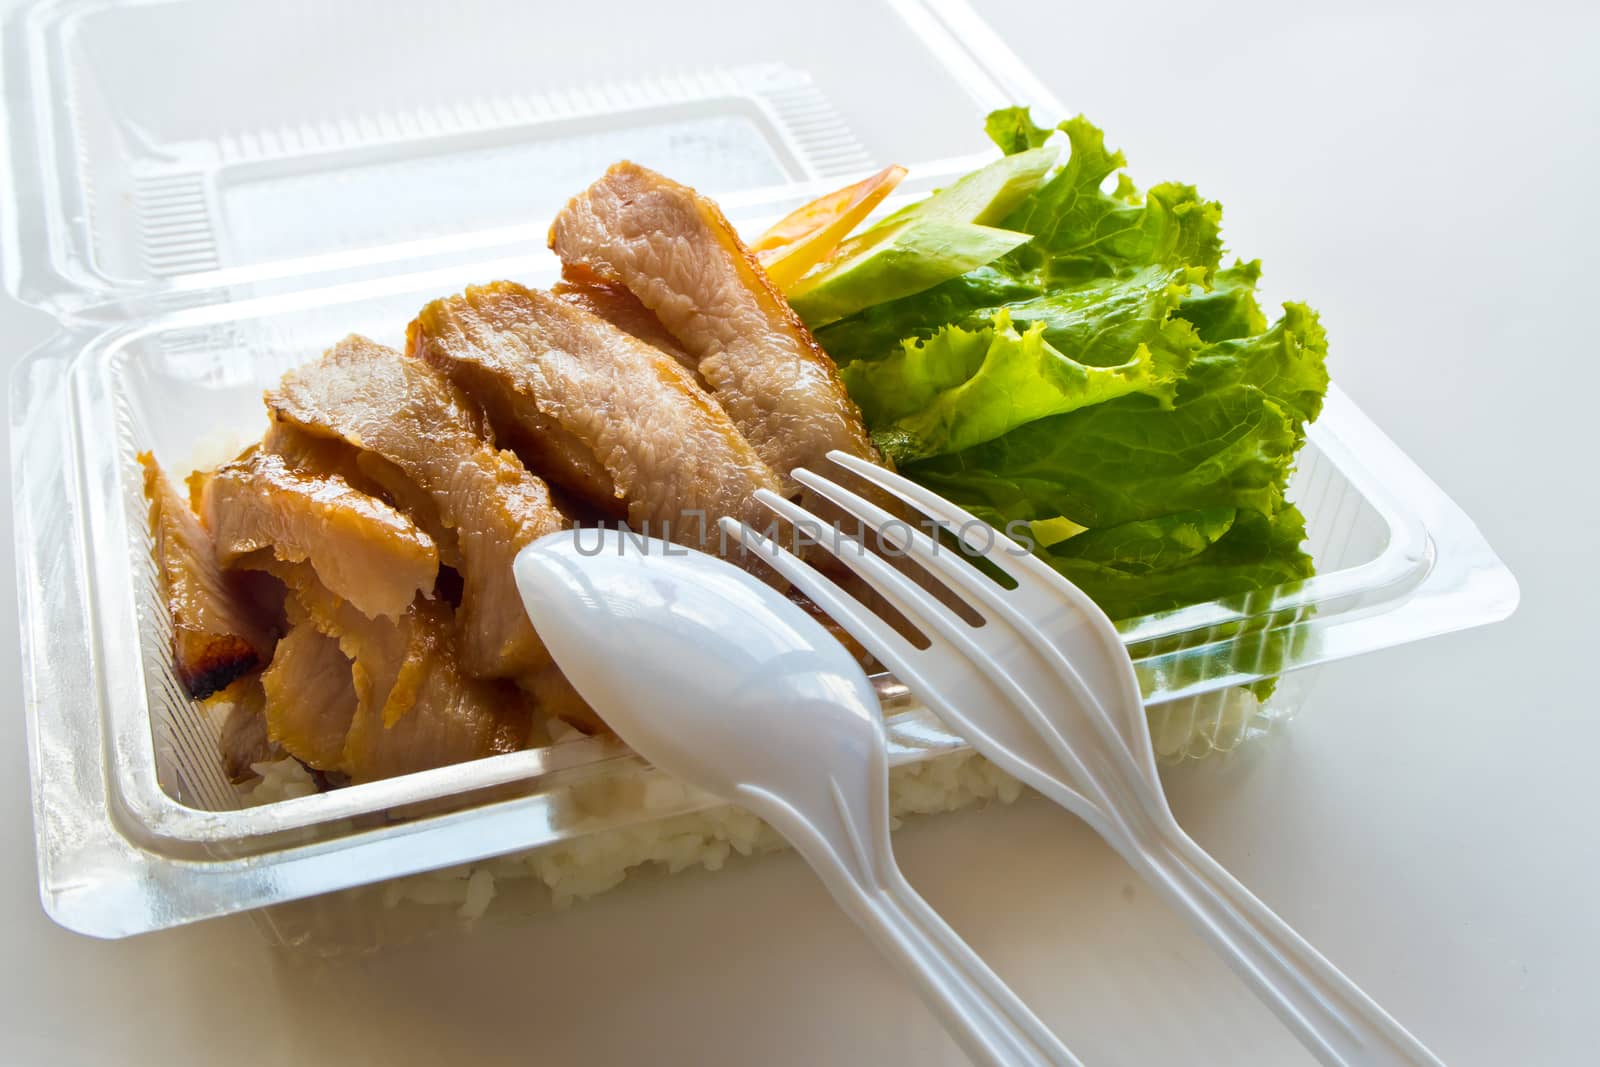 Roasted pork and rice in a plastic box by Satakorn